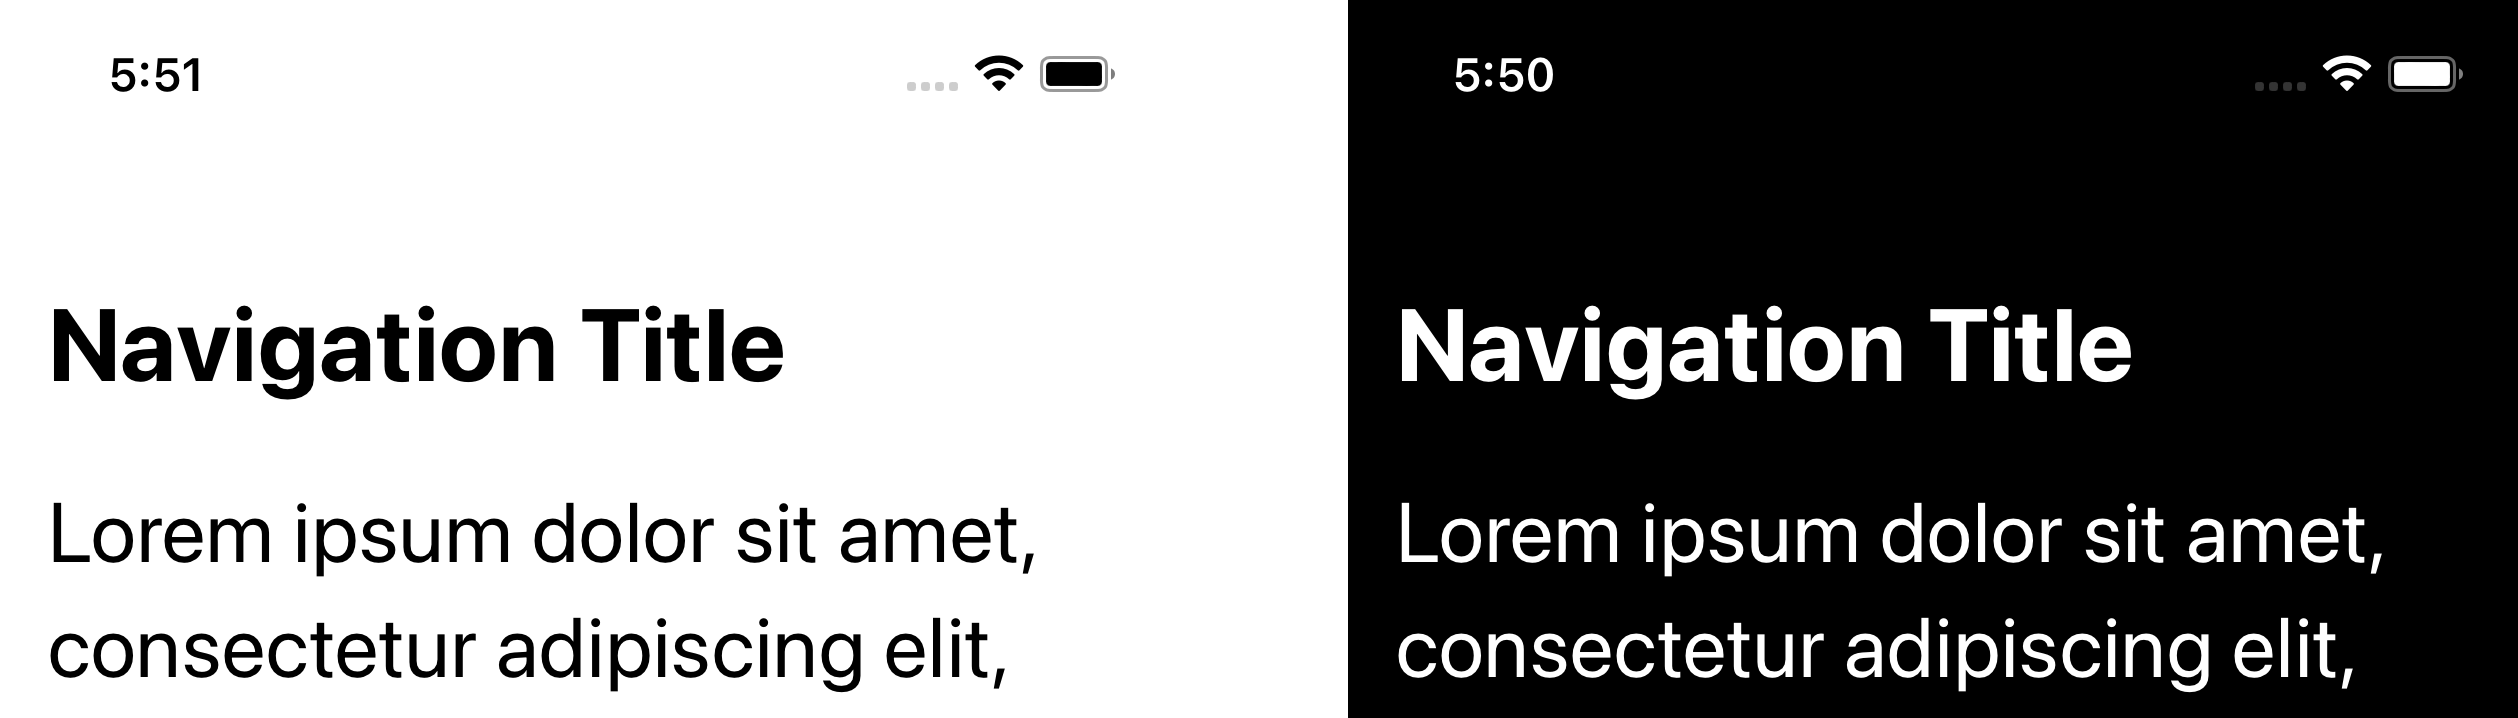 A status bar can be present in two colors, black and white.